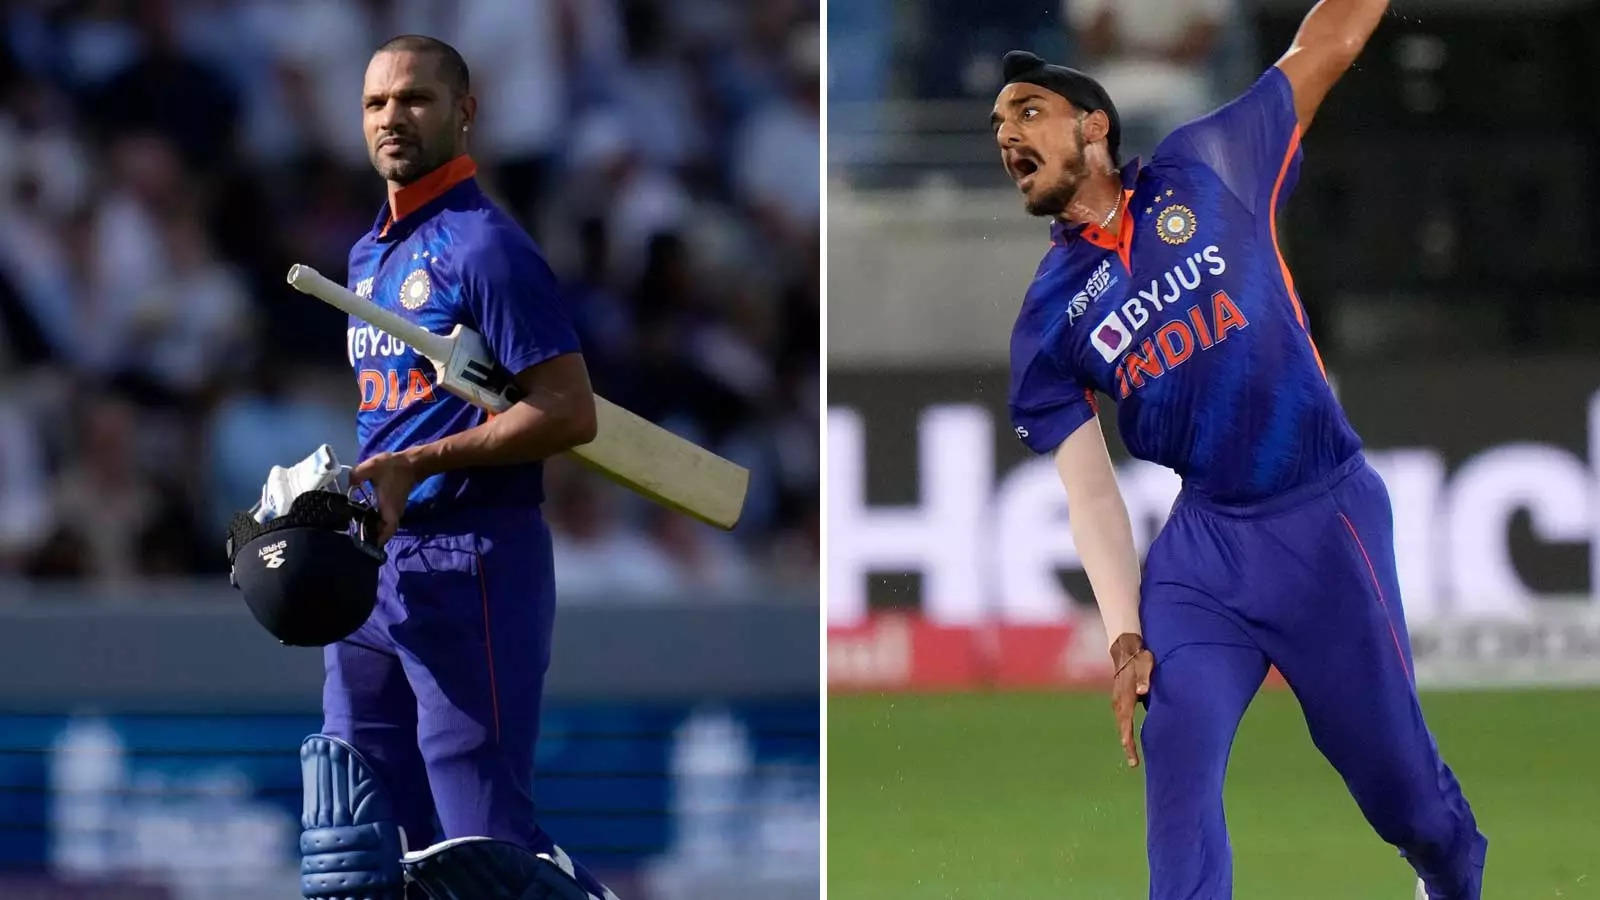 Arshdeep Singh has been backed by Shikhar Dhawan over dropped catch incident against Pakistan